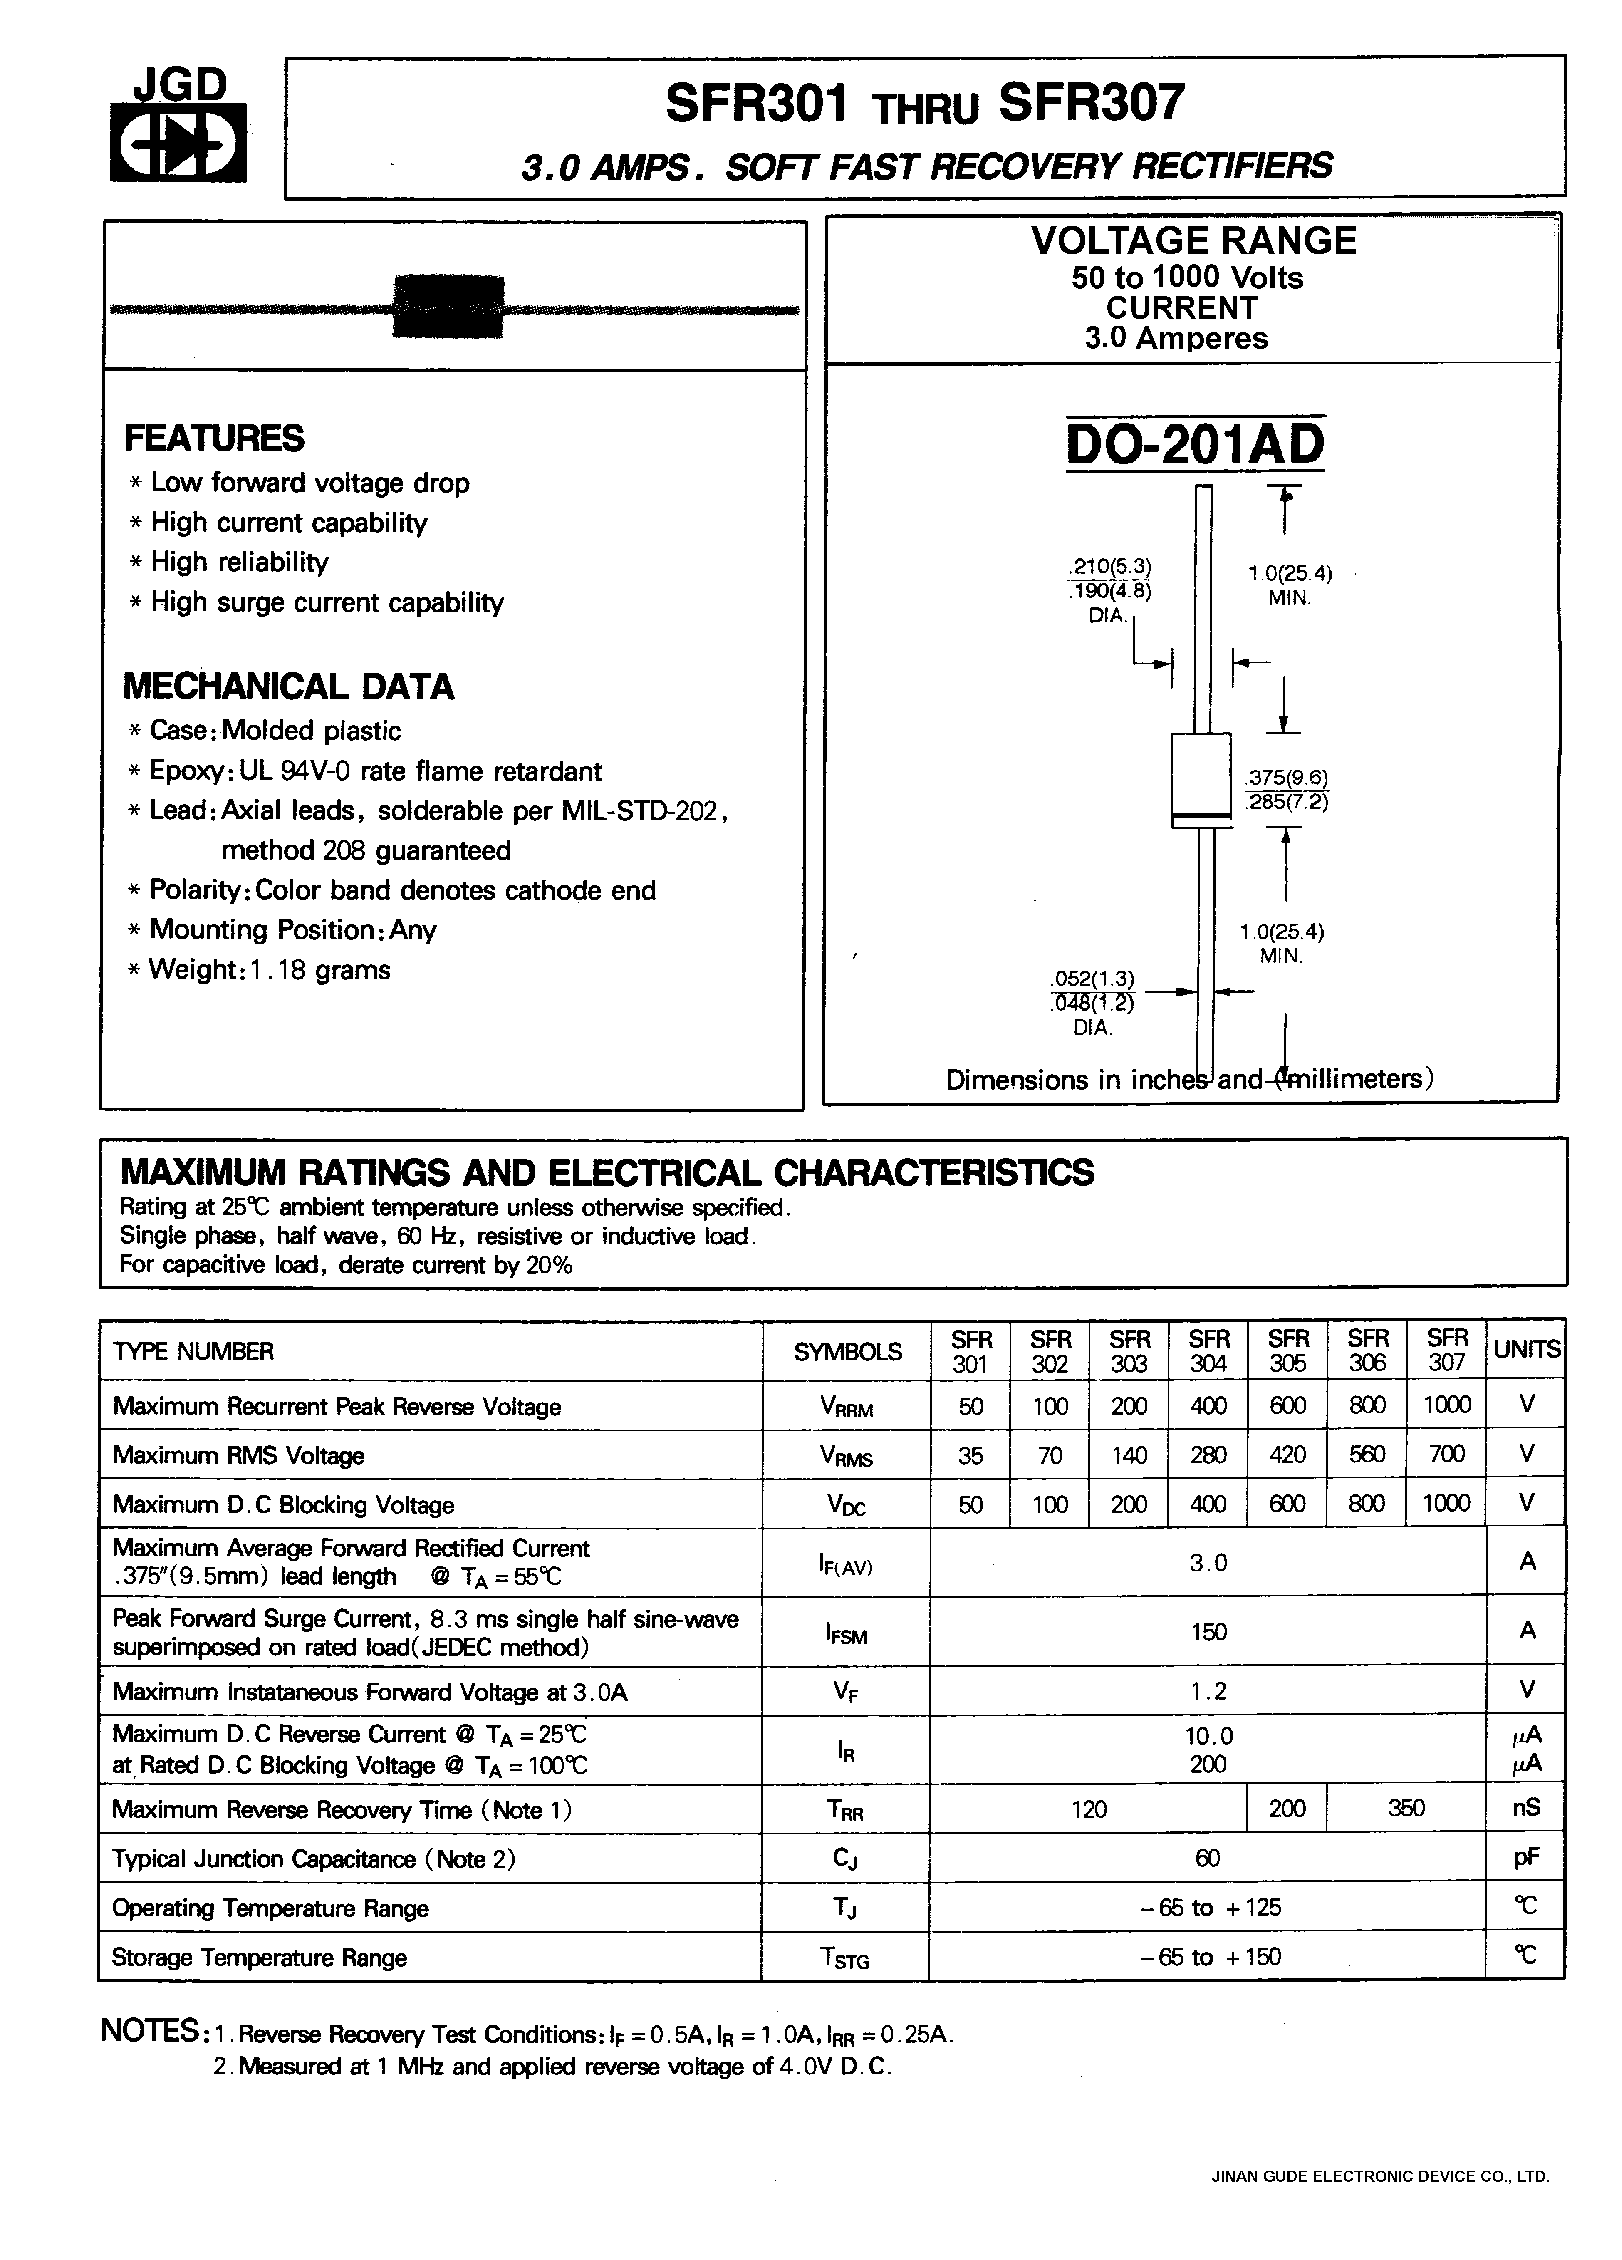 Datasheet SFR304 - 3.0 AMPS. SOFT FAST RECOVERY RECTIFIERS page 1